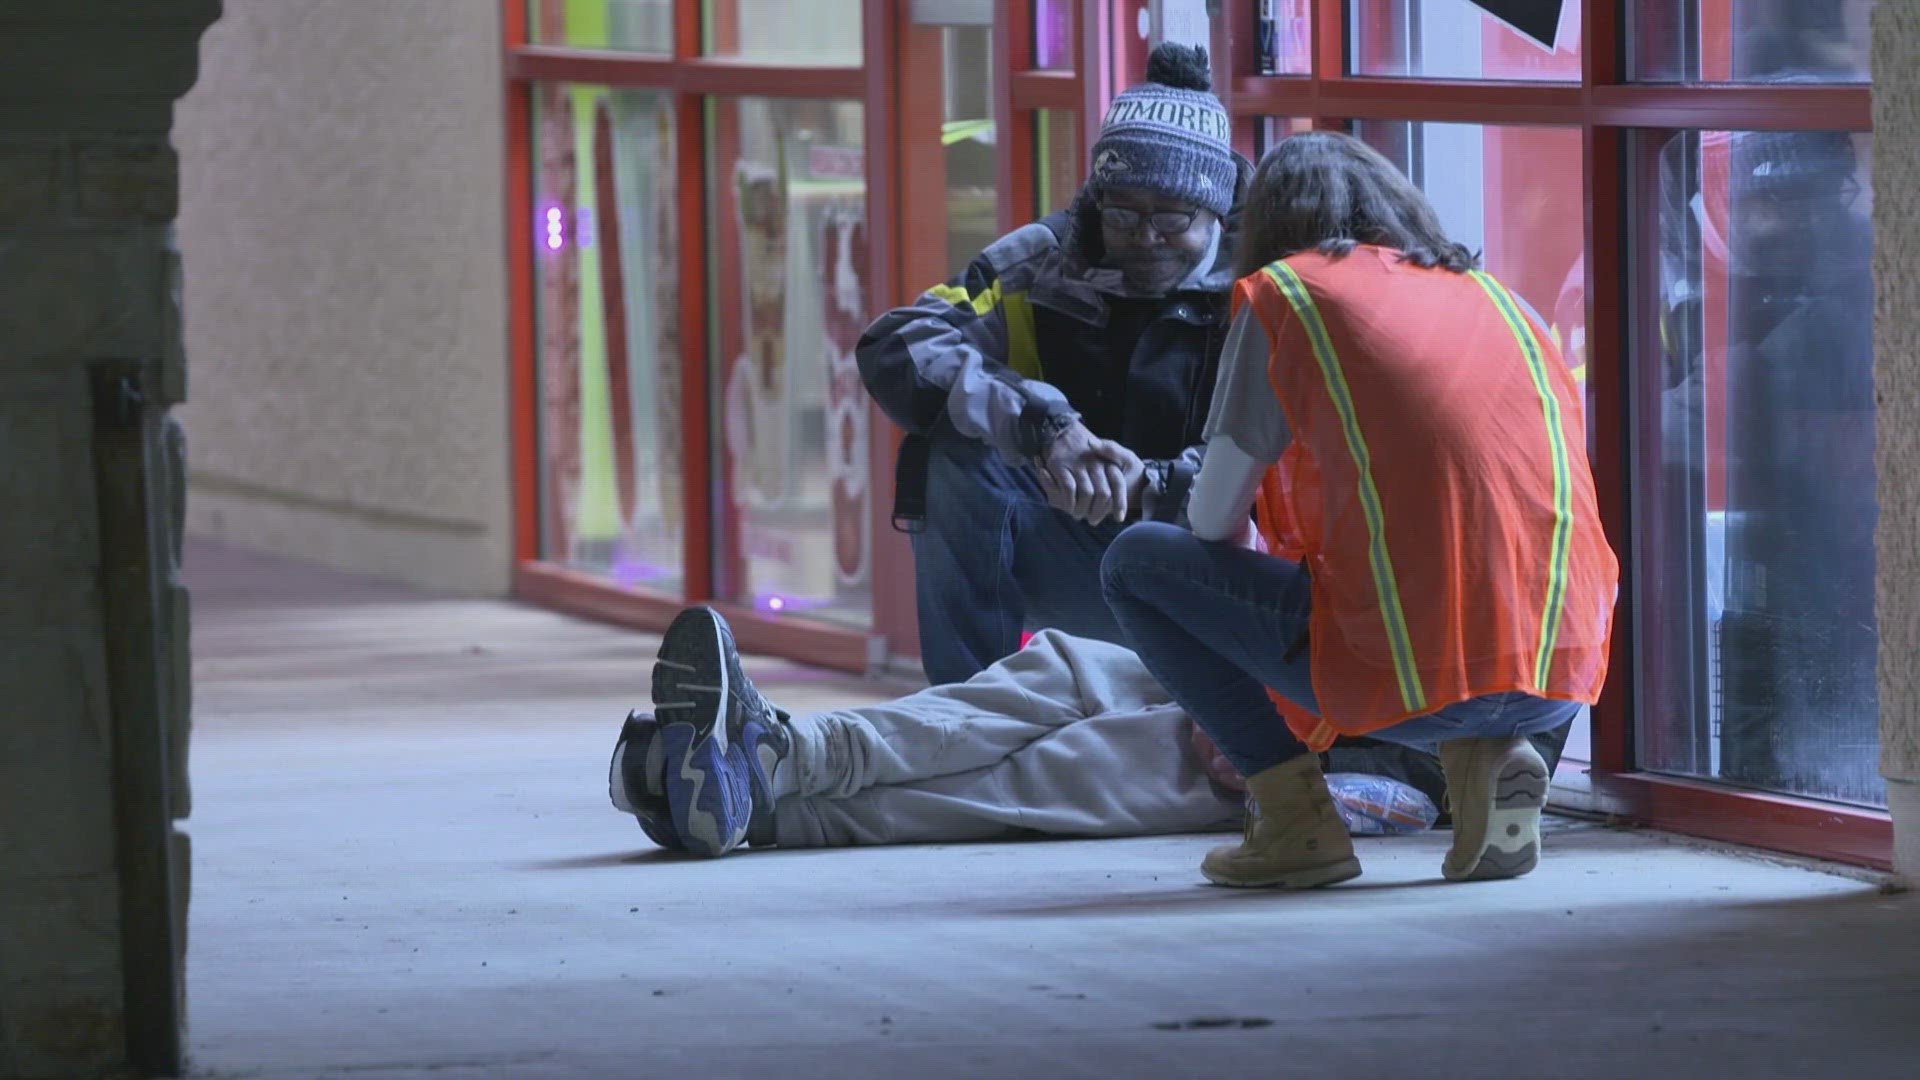 Tarrant County's latest homeless data shows a significant difference in homelessness compared to last year.